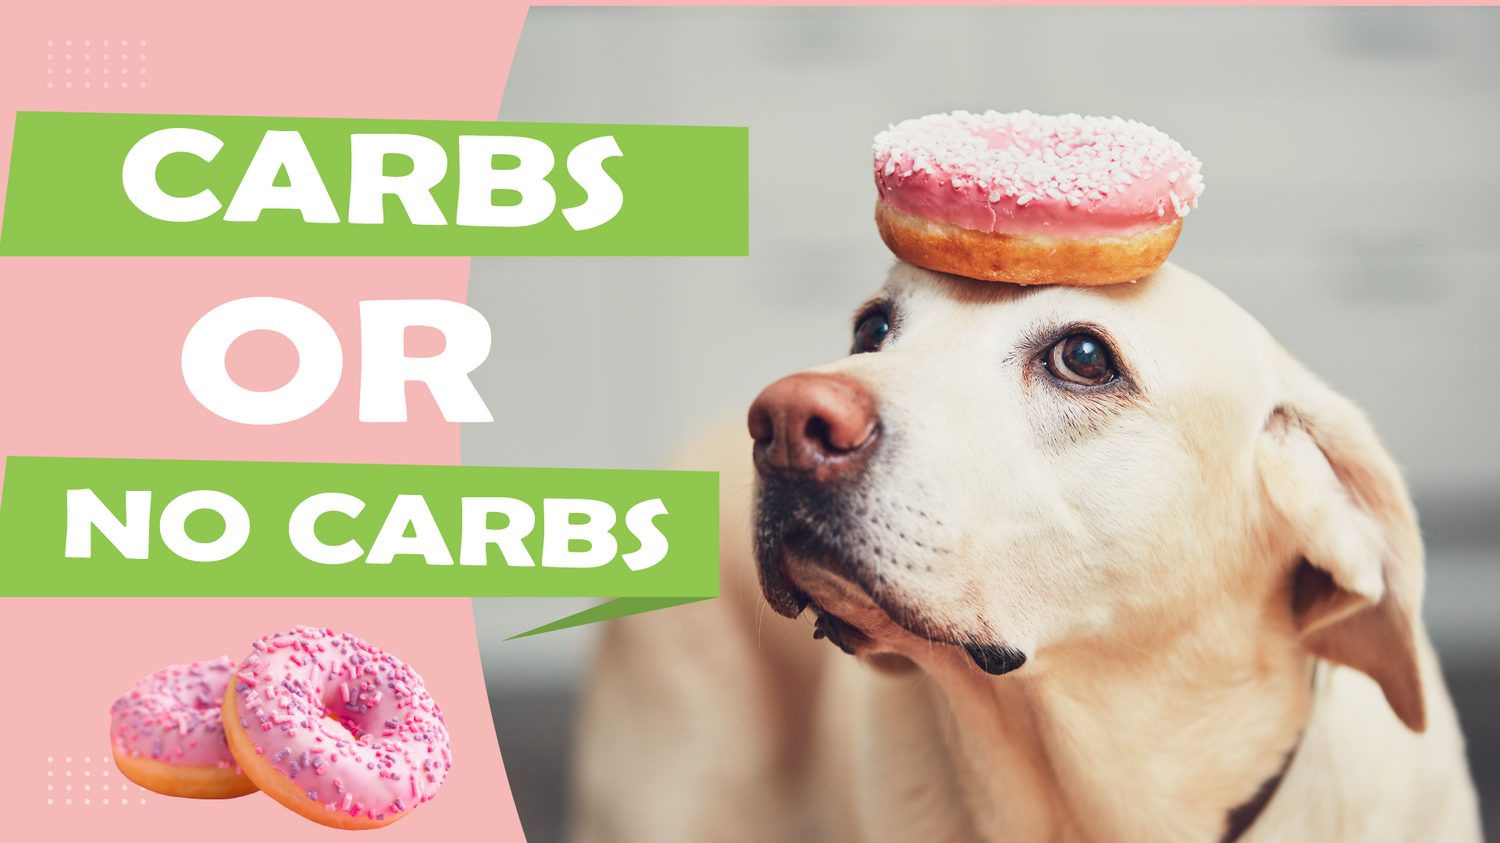 Carbs or No Carbs For Your Weight Loss Goals